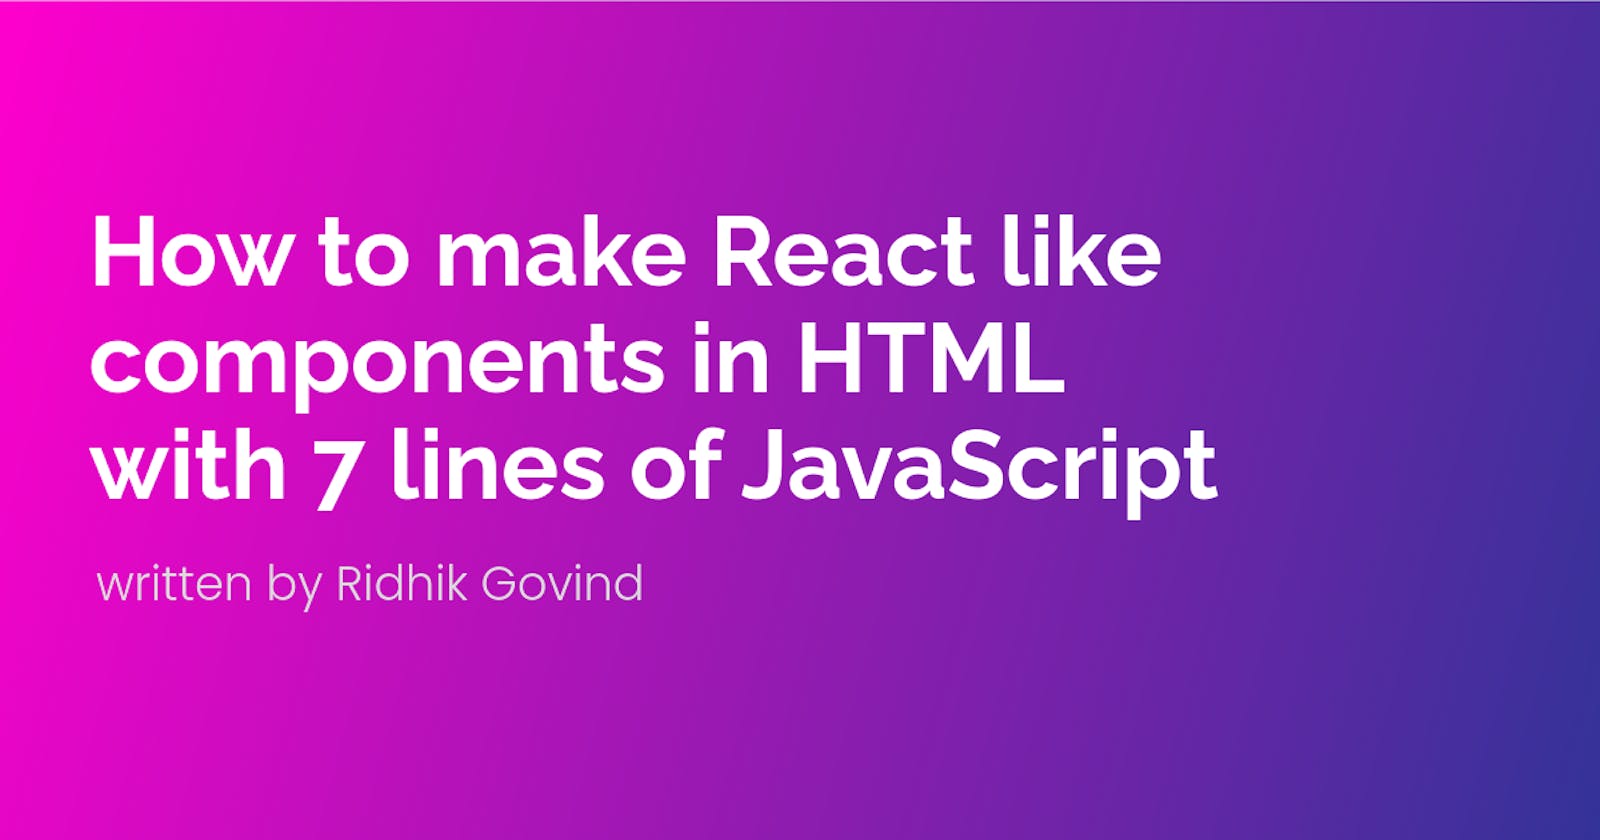 How to make React like components in HTML with 7 lines of JavaScript